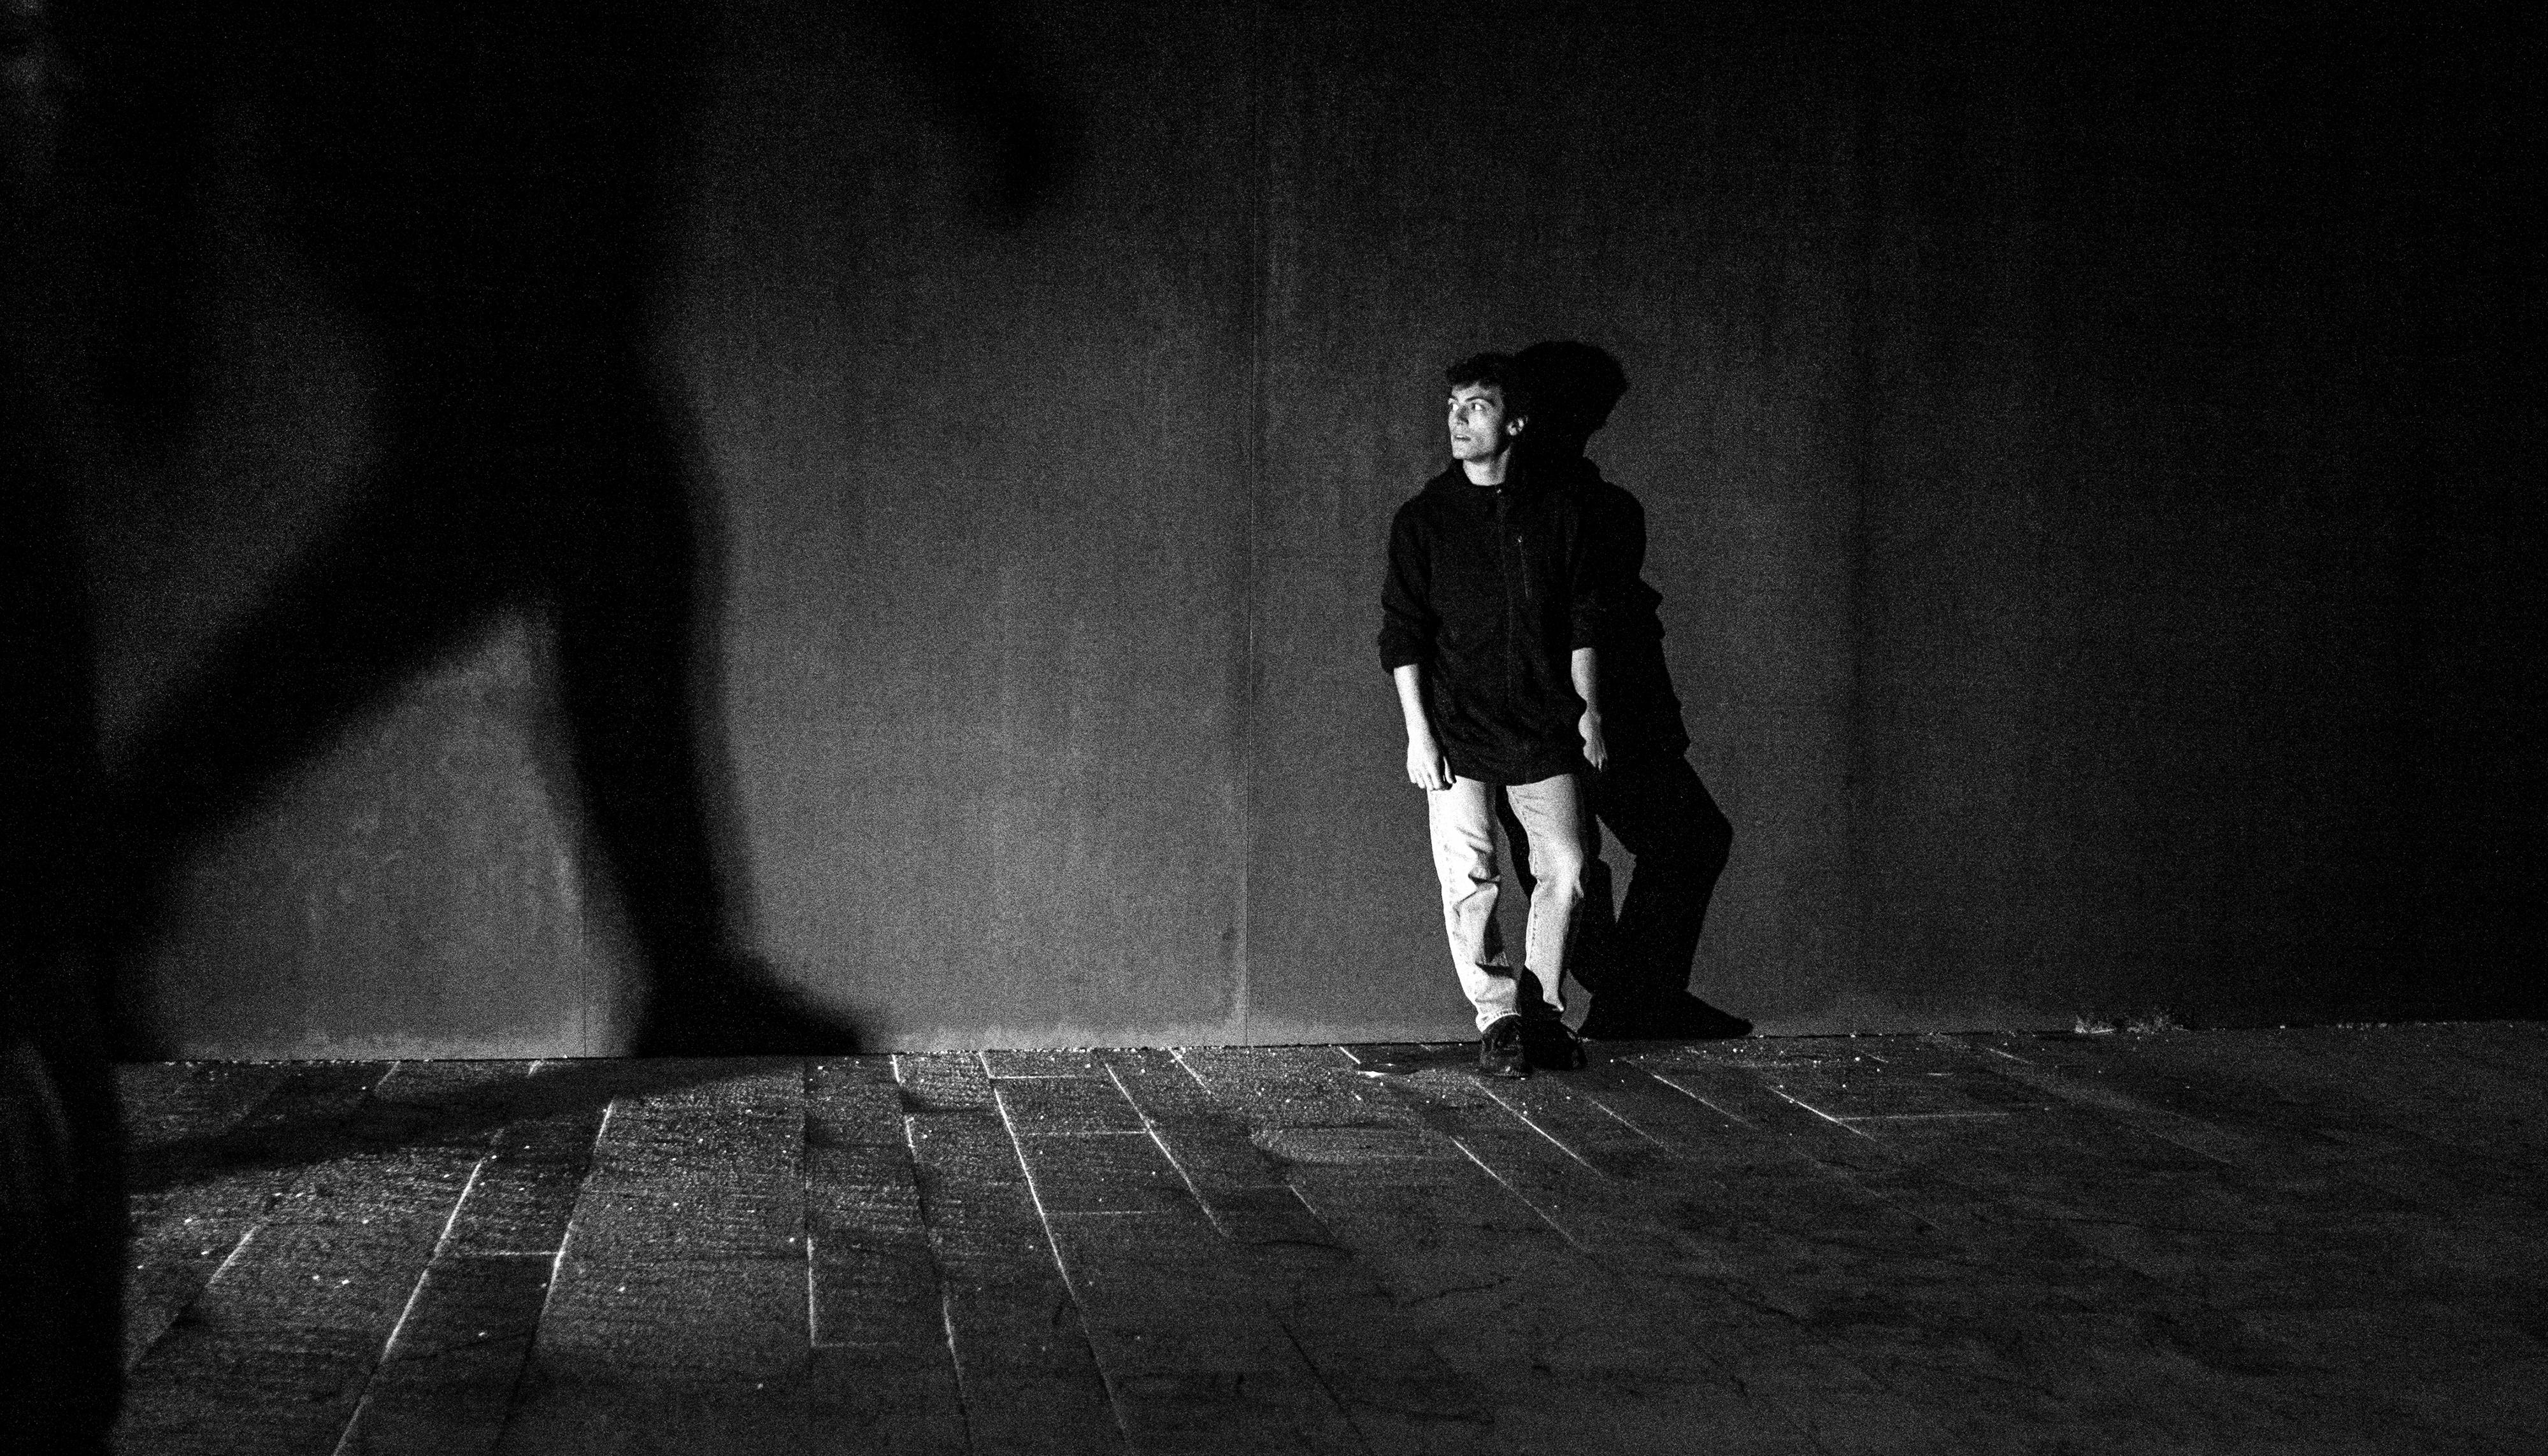 Black and white photograph. A boy, leaning against a wall, is waiting motionless. He looks to the right, where the shadow of a walking body appears large on the wall.